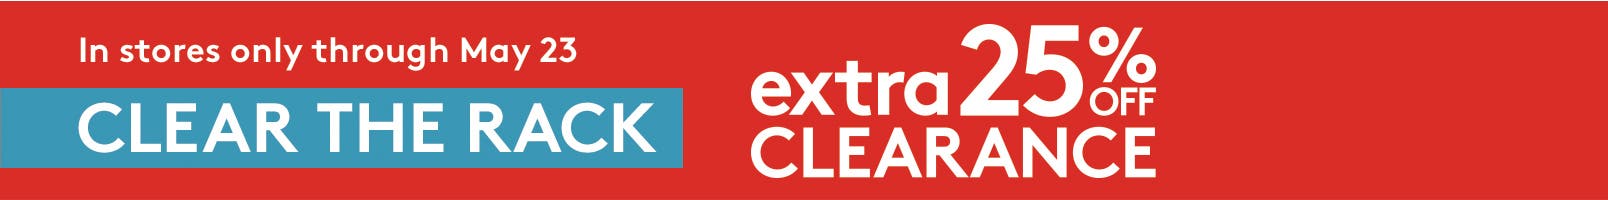 CLEAR THE RACK extra 25% off clearance